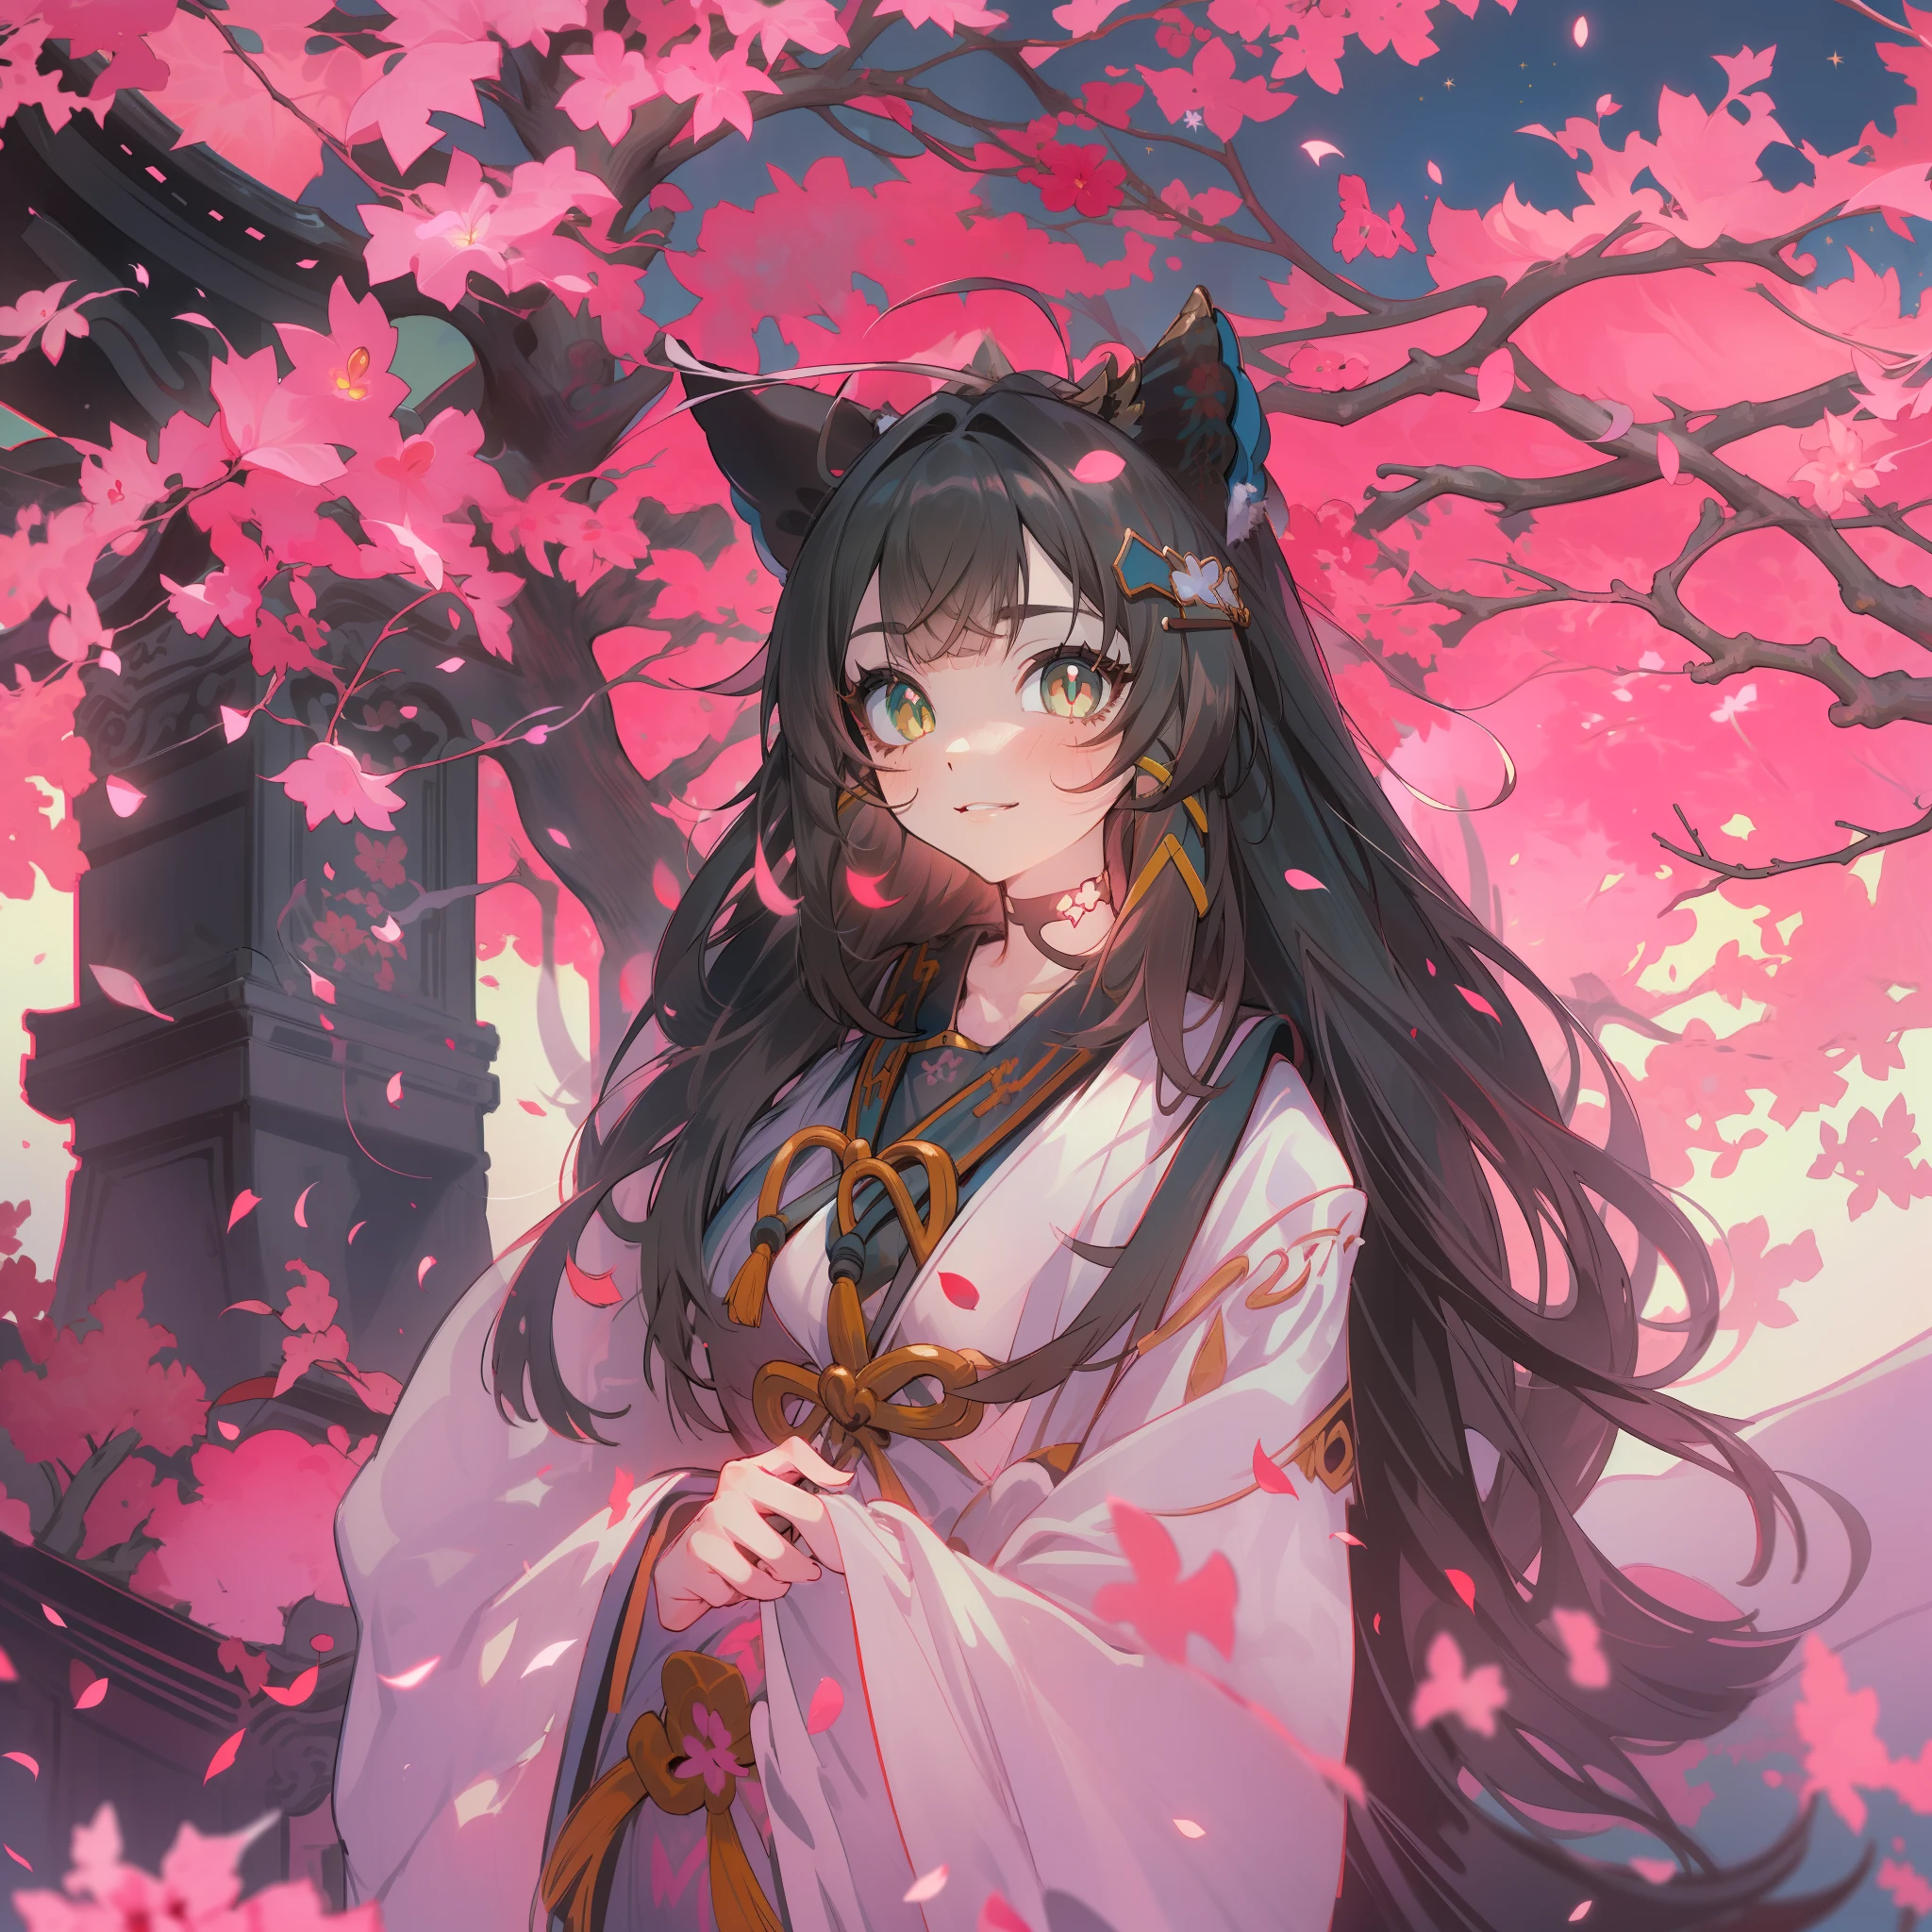 red color eyes，Bright red pupils，cabelos preto e longos，Japanese priestess costume, red kimono，white under lingerie，Dull hair，Big hazy eyes，Facial details are exquisite，Impeccable，Slightly rosy，8k, Masterpiece, 1 girl , nakeness，White body，Pink , Light pink lips, Calm, Logical, Knife fan,Delicate face,dishiveredhair，Stunning anime face portrait，solo，nigh sky，exteriors，themoon，As estrelas，Long dancing hair,starrysky，the night，Beautiful hair，Fantastic cherry blossom tree，Dream like ( Ambient lighting), Dreamy, Fantastic, (solo: 1.2),  petals dancing,(detailed cat ears:1.3)，Black cat ears:1.1, (beautifully detailed hair:1.3), (Hollow black hair:1.3), Luscious waist-length hair, (multi-layered hair:1.5), (hair splayed out:1.2), beautiful-detailed facial structure, Detailed beautiful face:1.3, Sexy face, A grim face, slender facial structure, (Detailed face:1.33), Big eyes, (Detailed glowing eyes:1.1), luminous red eyes, (Detailed facial expressions:1.1), Shy, Facial smile，detailed-slight red blush, (detailed boobs:1.2), Large size chest, (Slim waist:1.1), (slim legs:1.1), Stand up full body diagram，(Firefly: 1. 2), Lamp 3), Starry sky, tori ready,water puddles